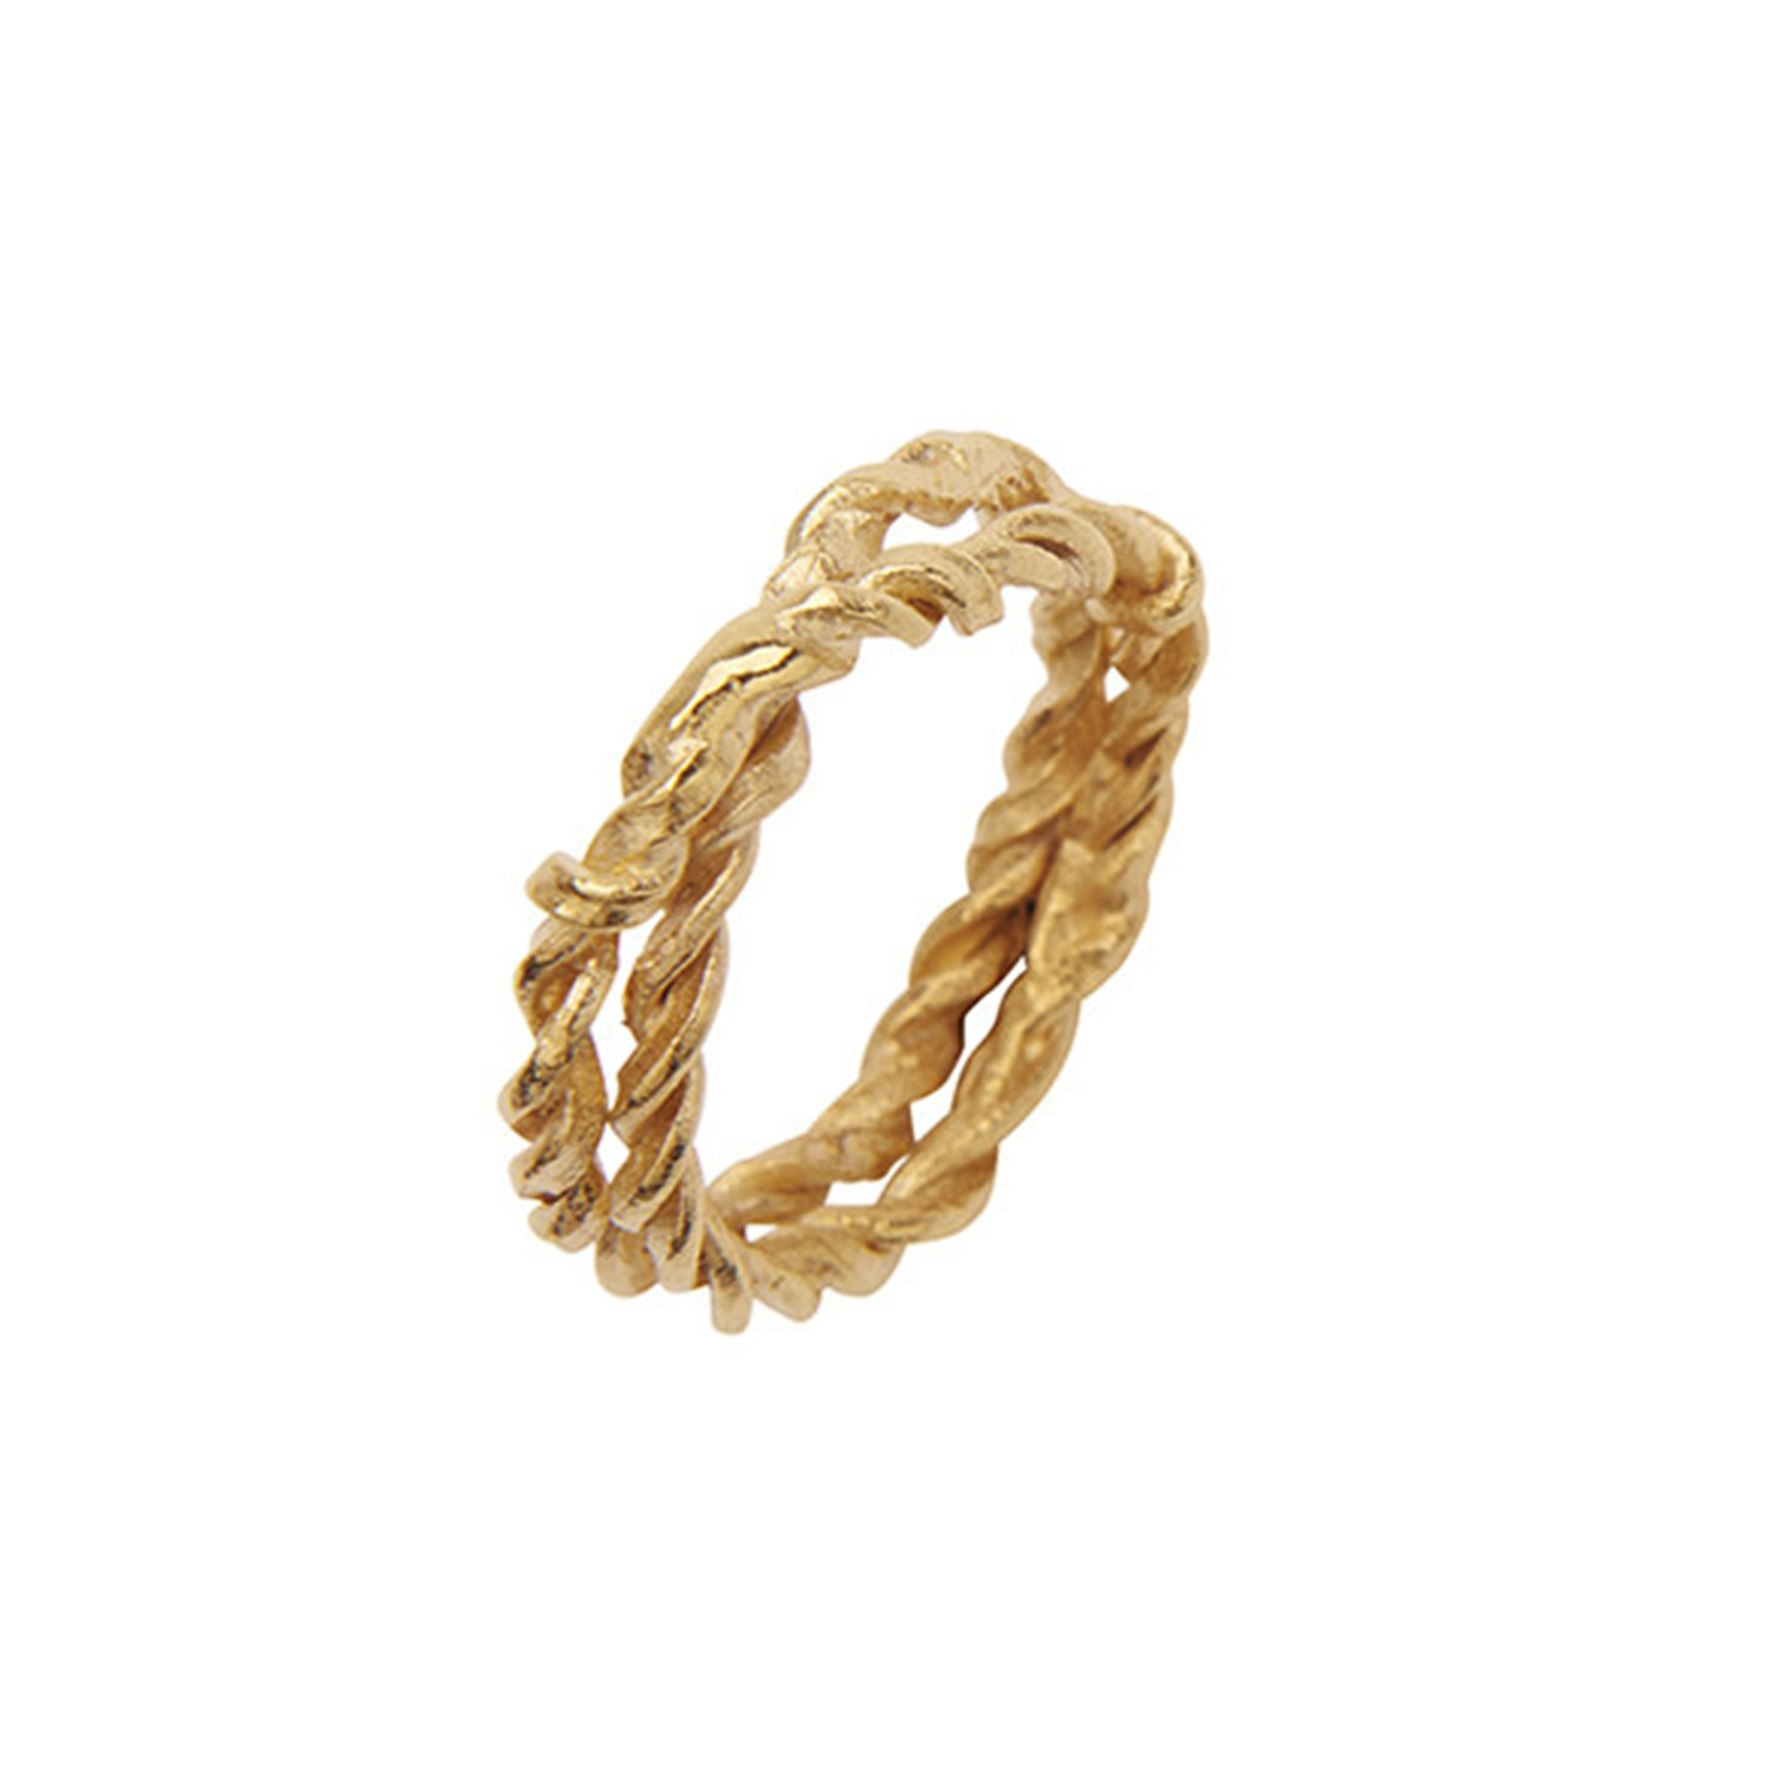 Blake Double Ring from Pico in Goldplated Brass